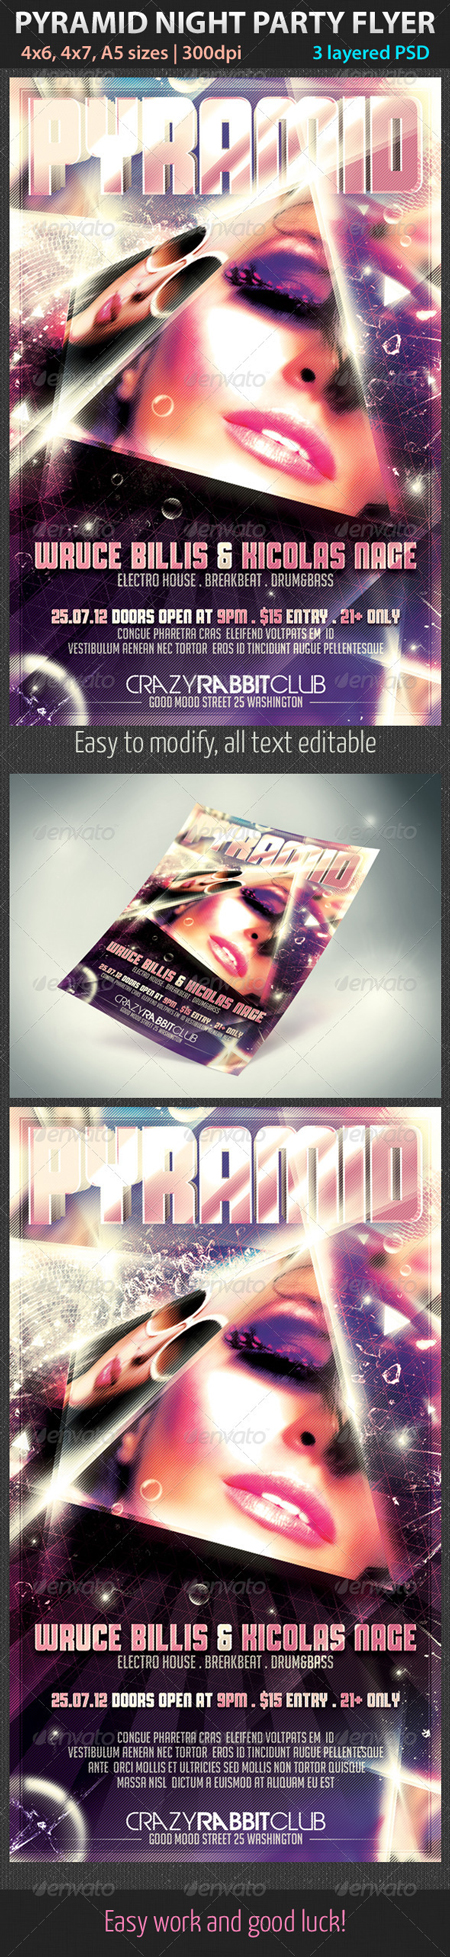 GraphicRiver Pyramid Night Party Flyer